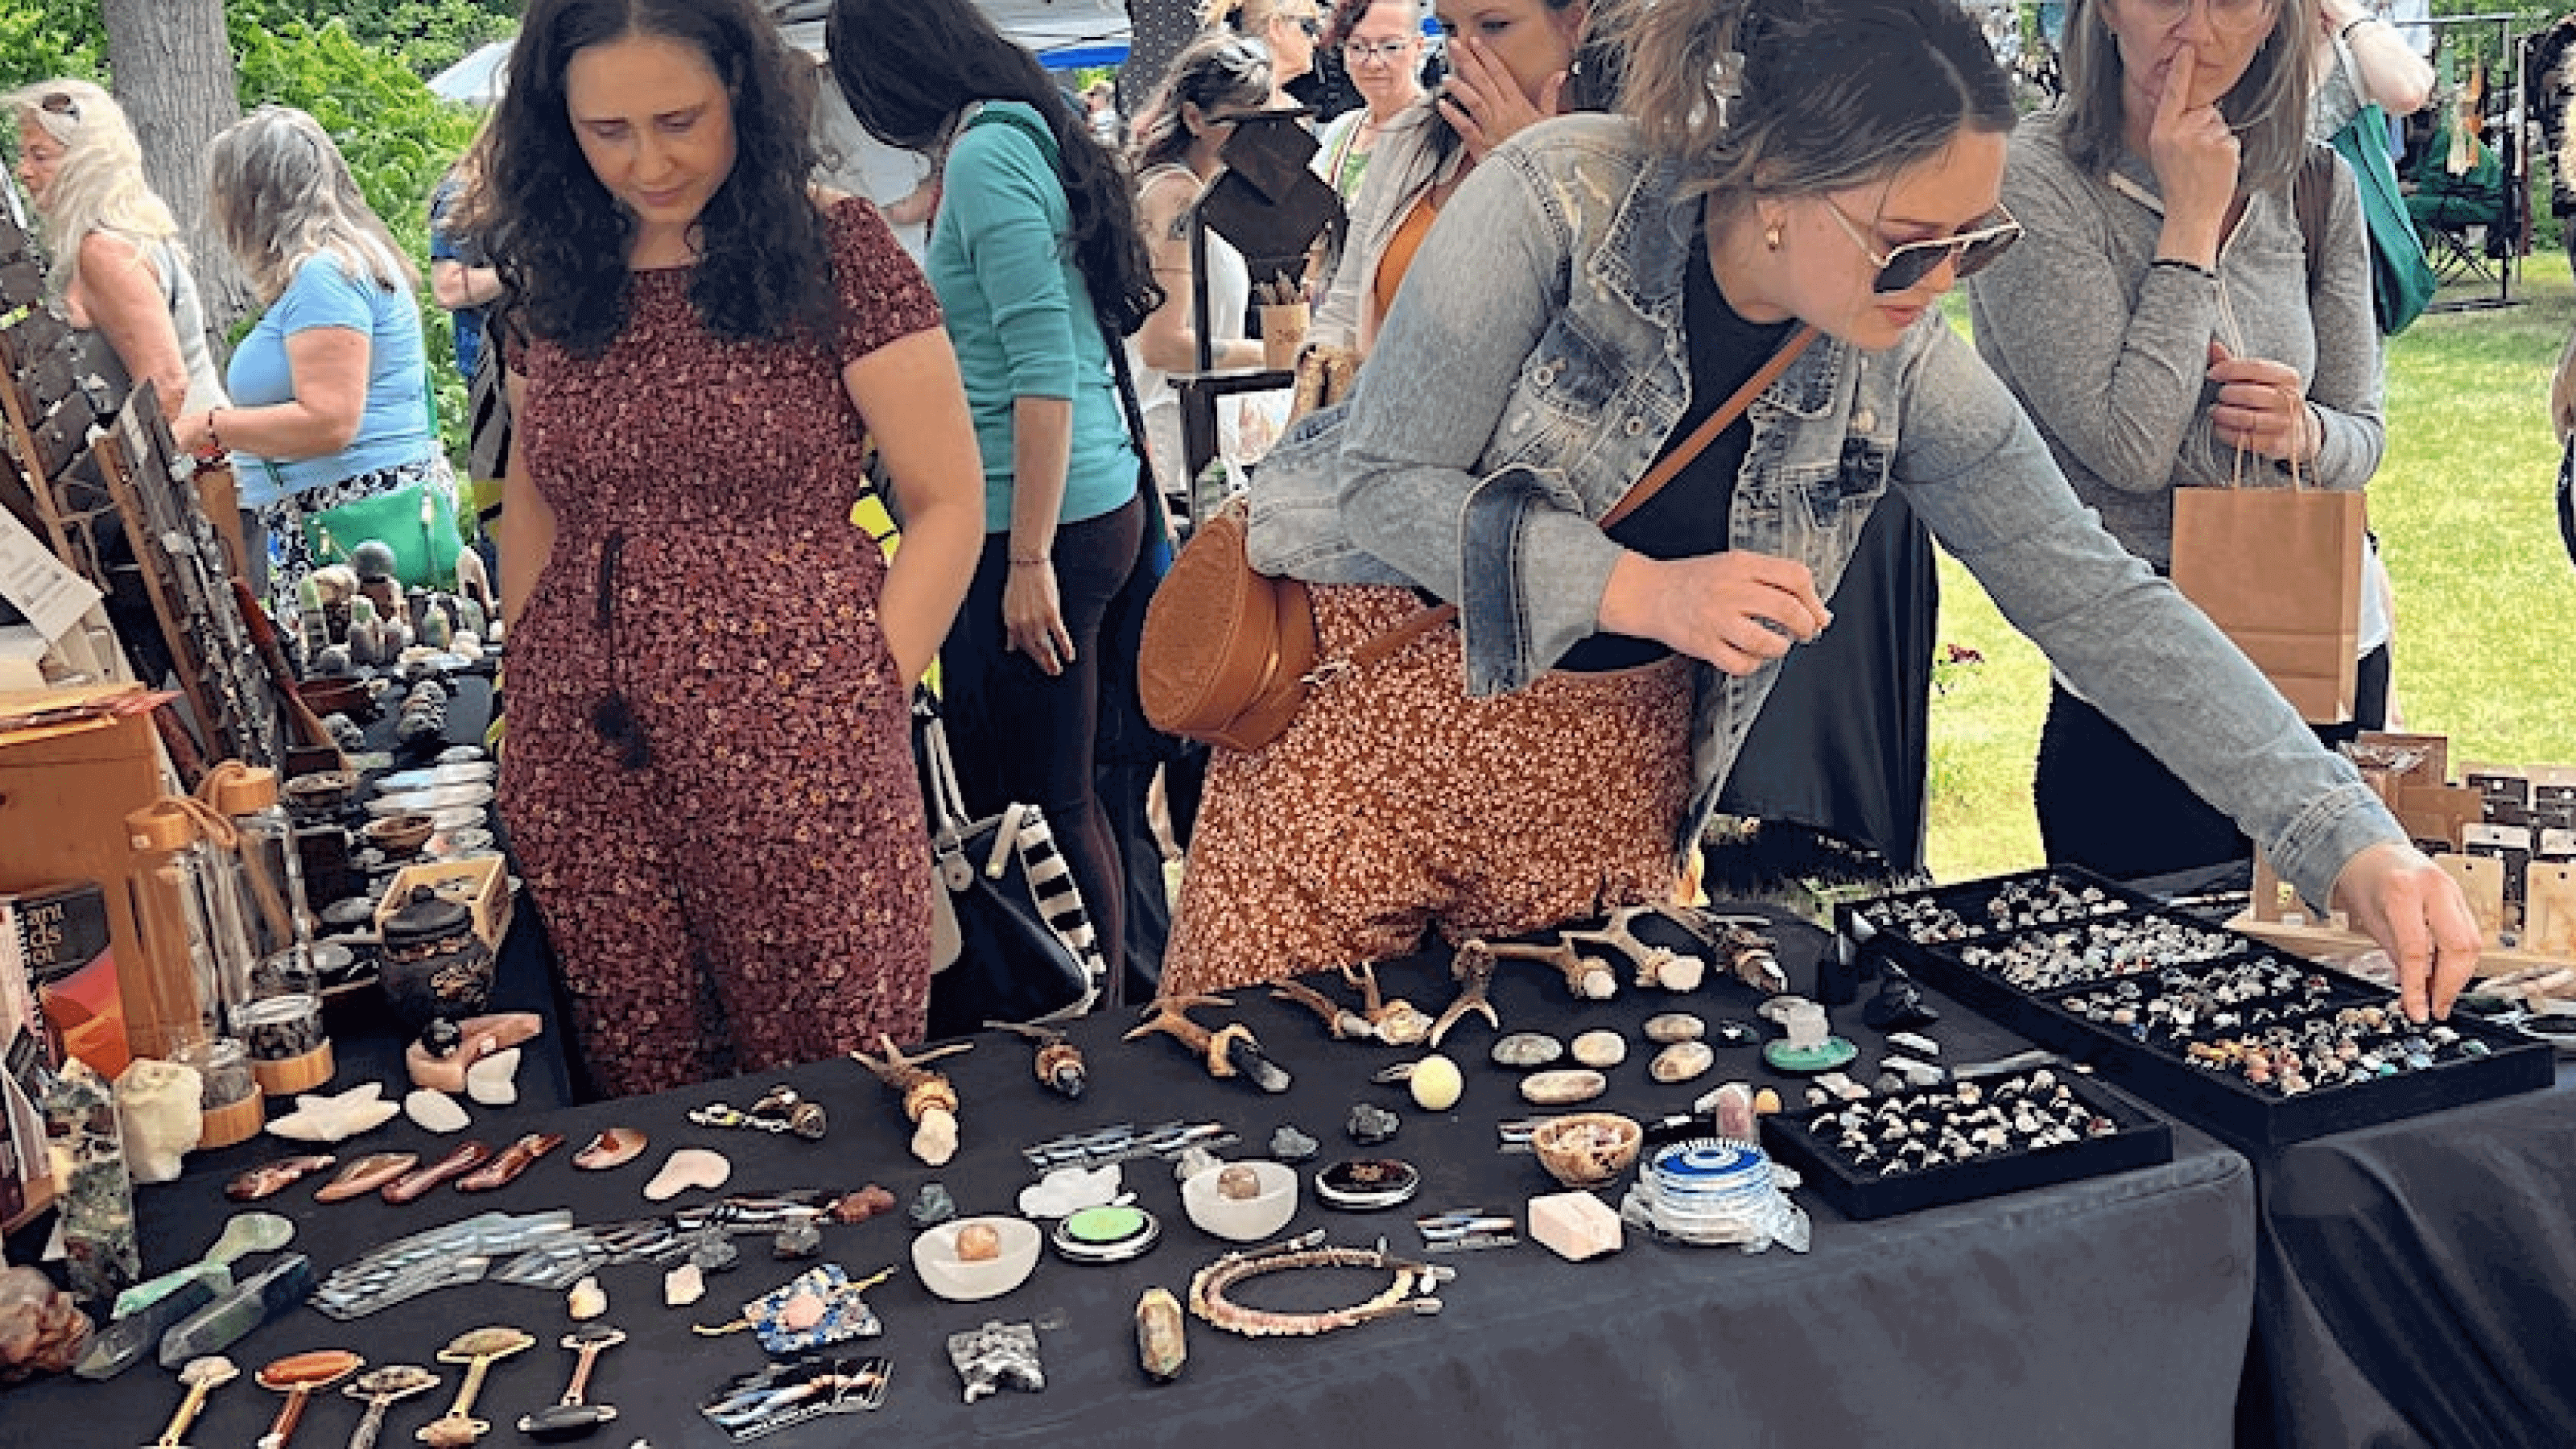 People looking at crafts at a fall festival market